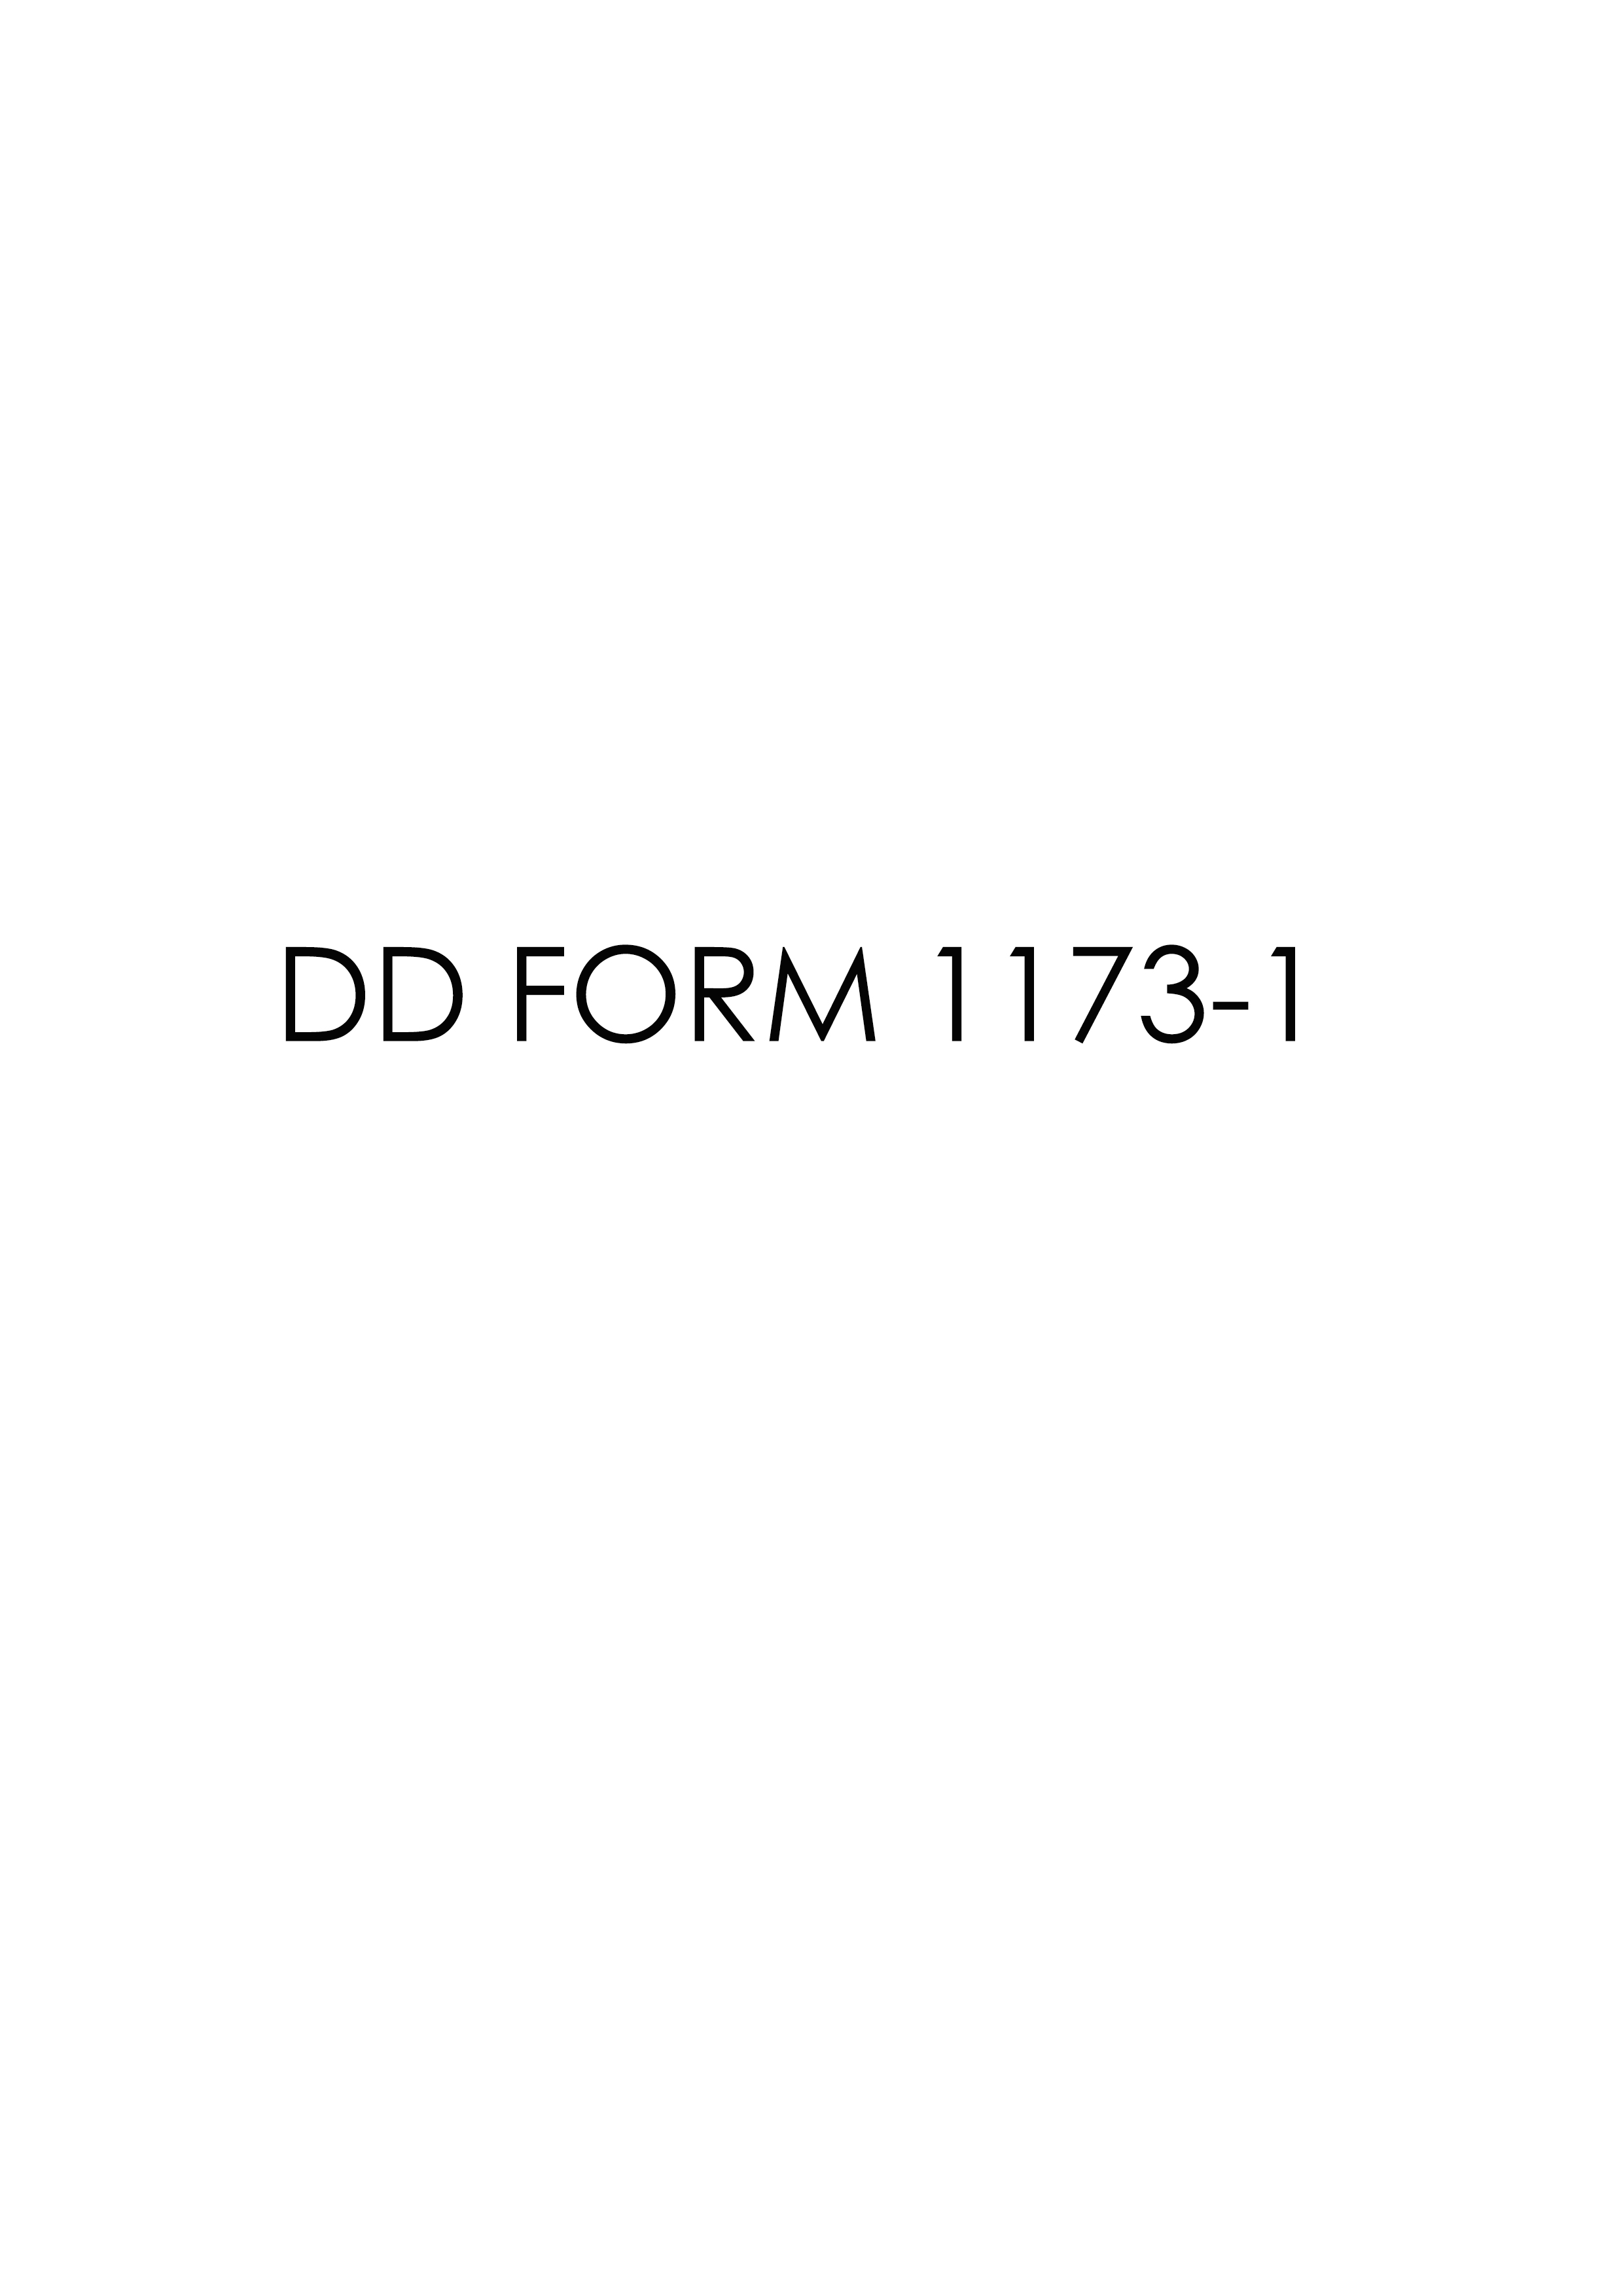 Download Fillable dd Form 1173-1